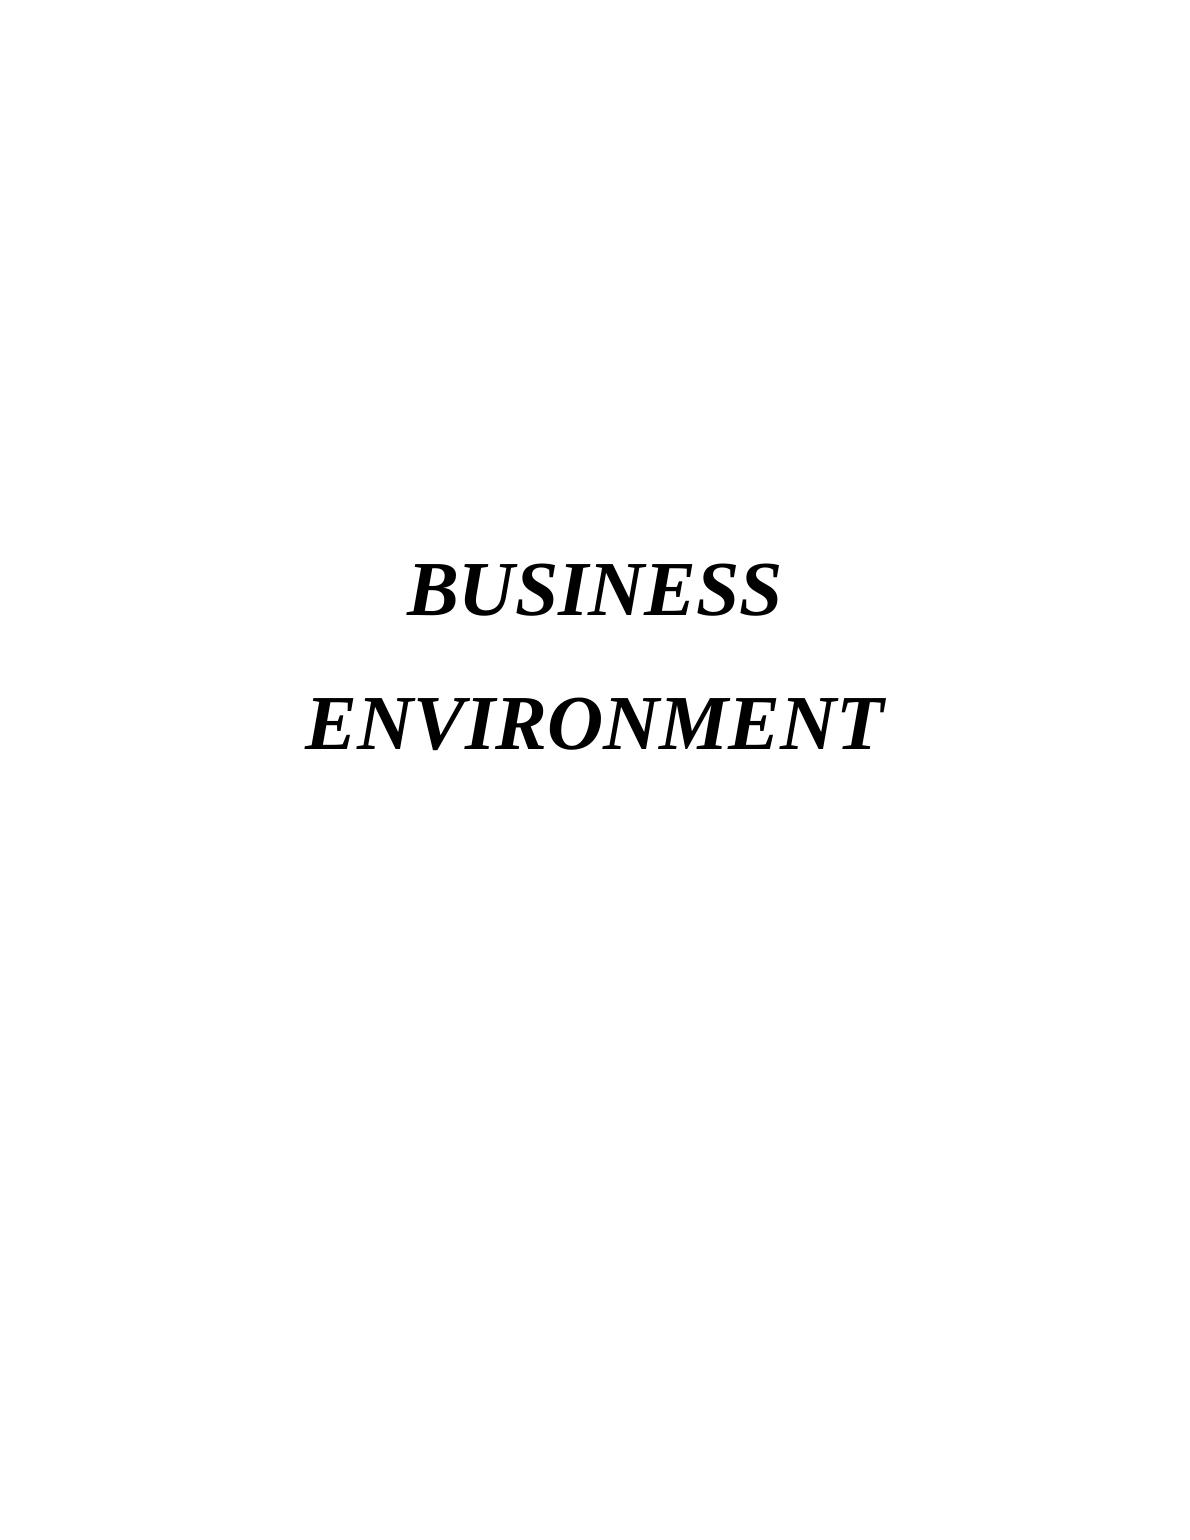 Report on Business Environment of Barkley Bank_1